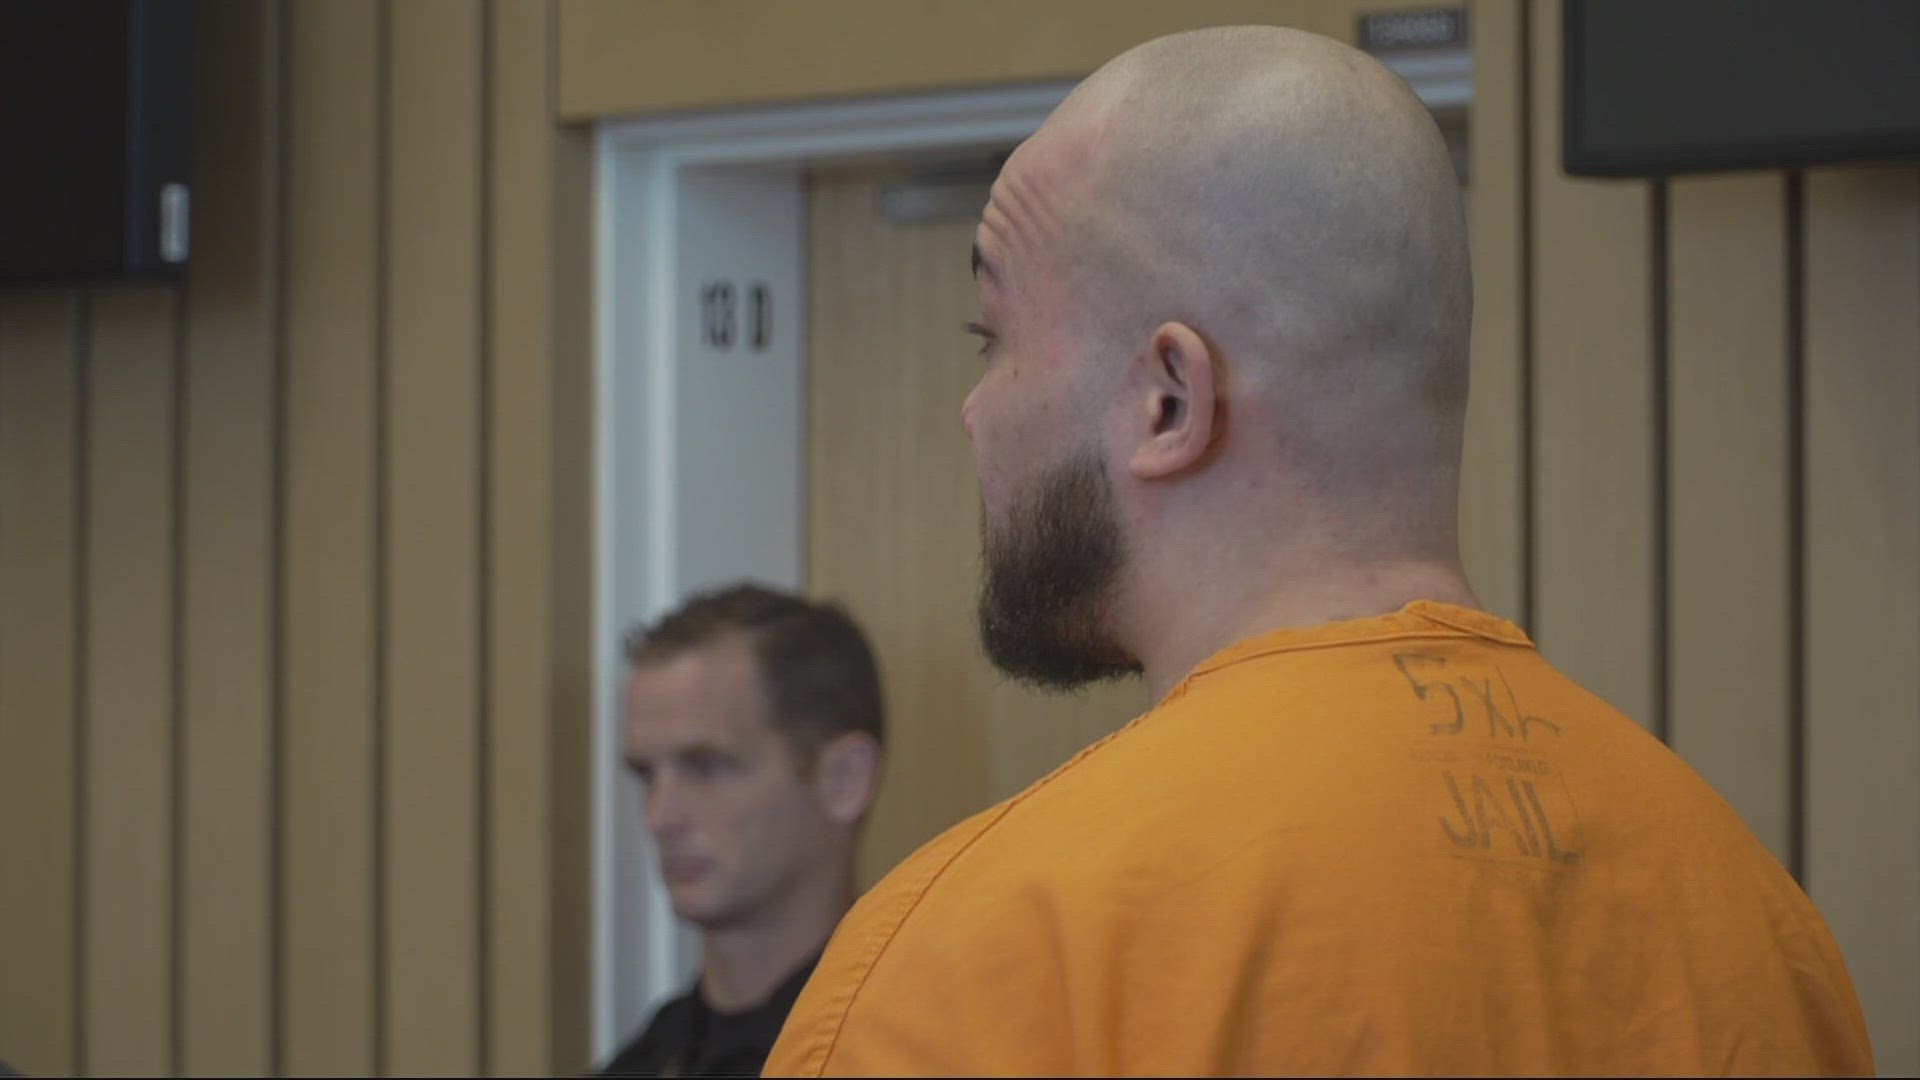 Toese was convicted in March on 10 counts stemming from a 2021 street brawl outside the Northeast Portland Kmart that burned down this week.